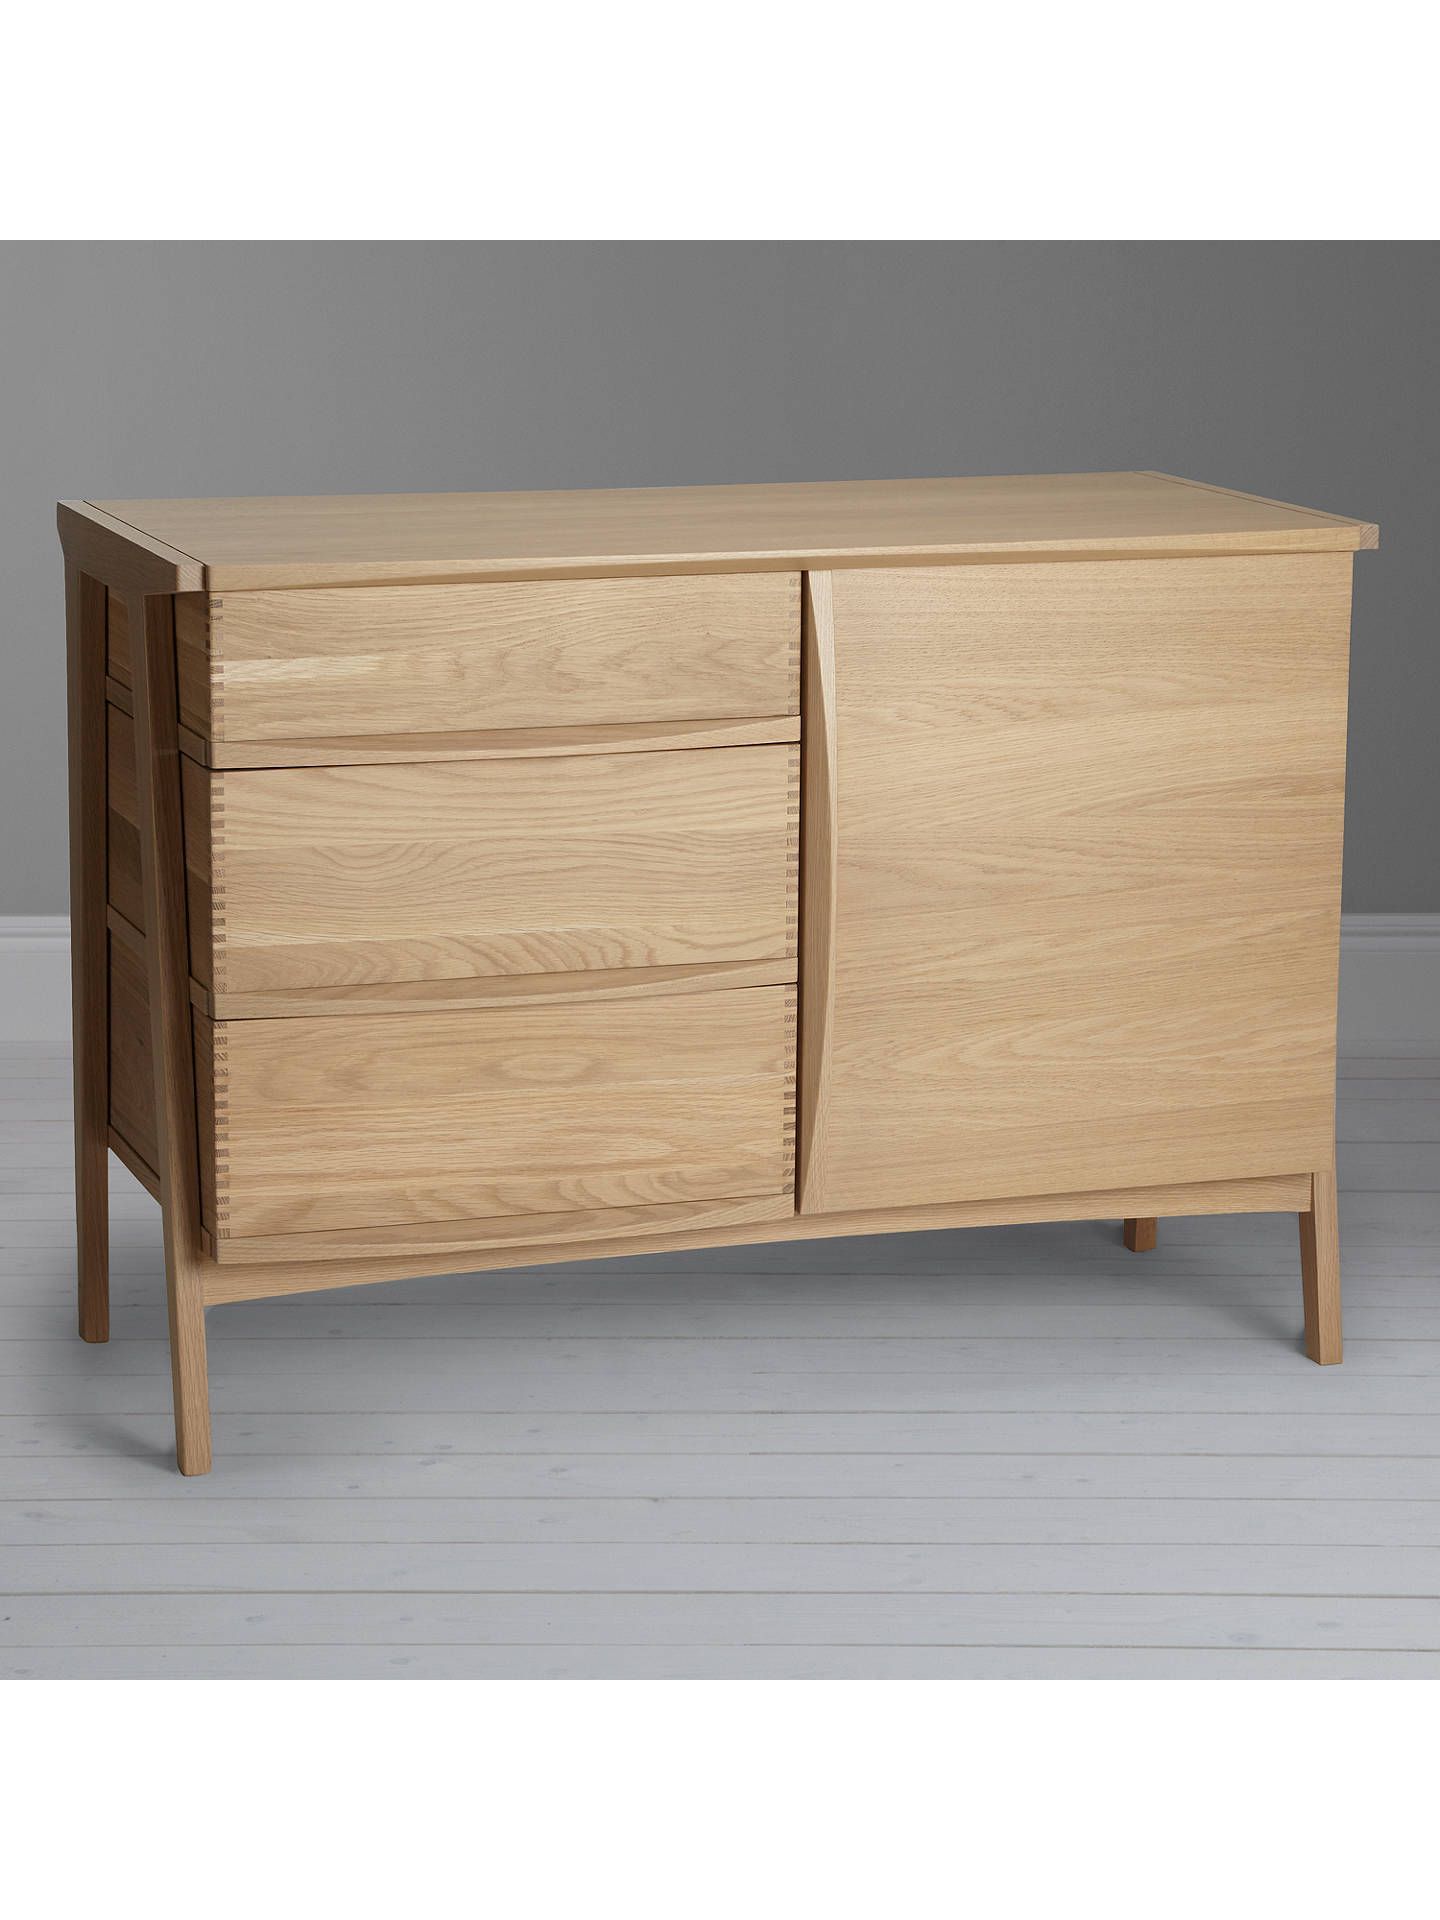 John Lewis & Partners Duhrer Small Sideboard, Oak In 2019 With Candace Door Credenzas (View 23 of 30)